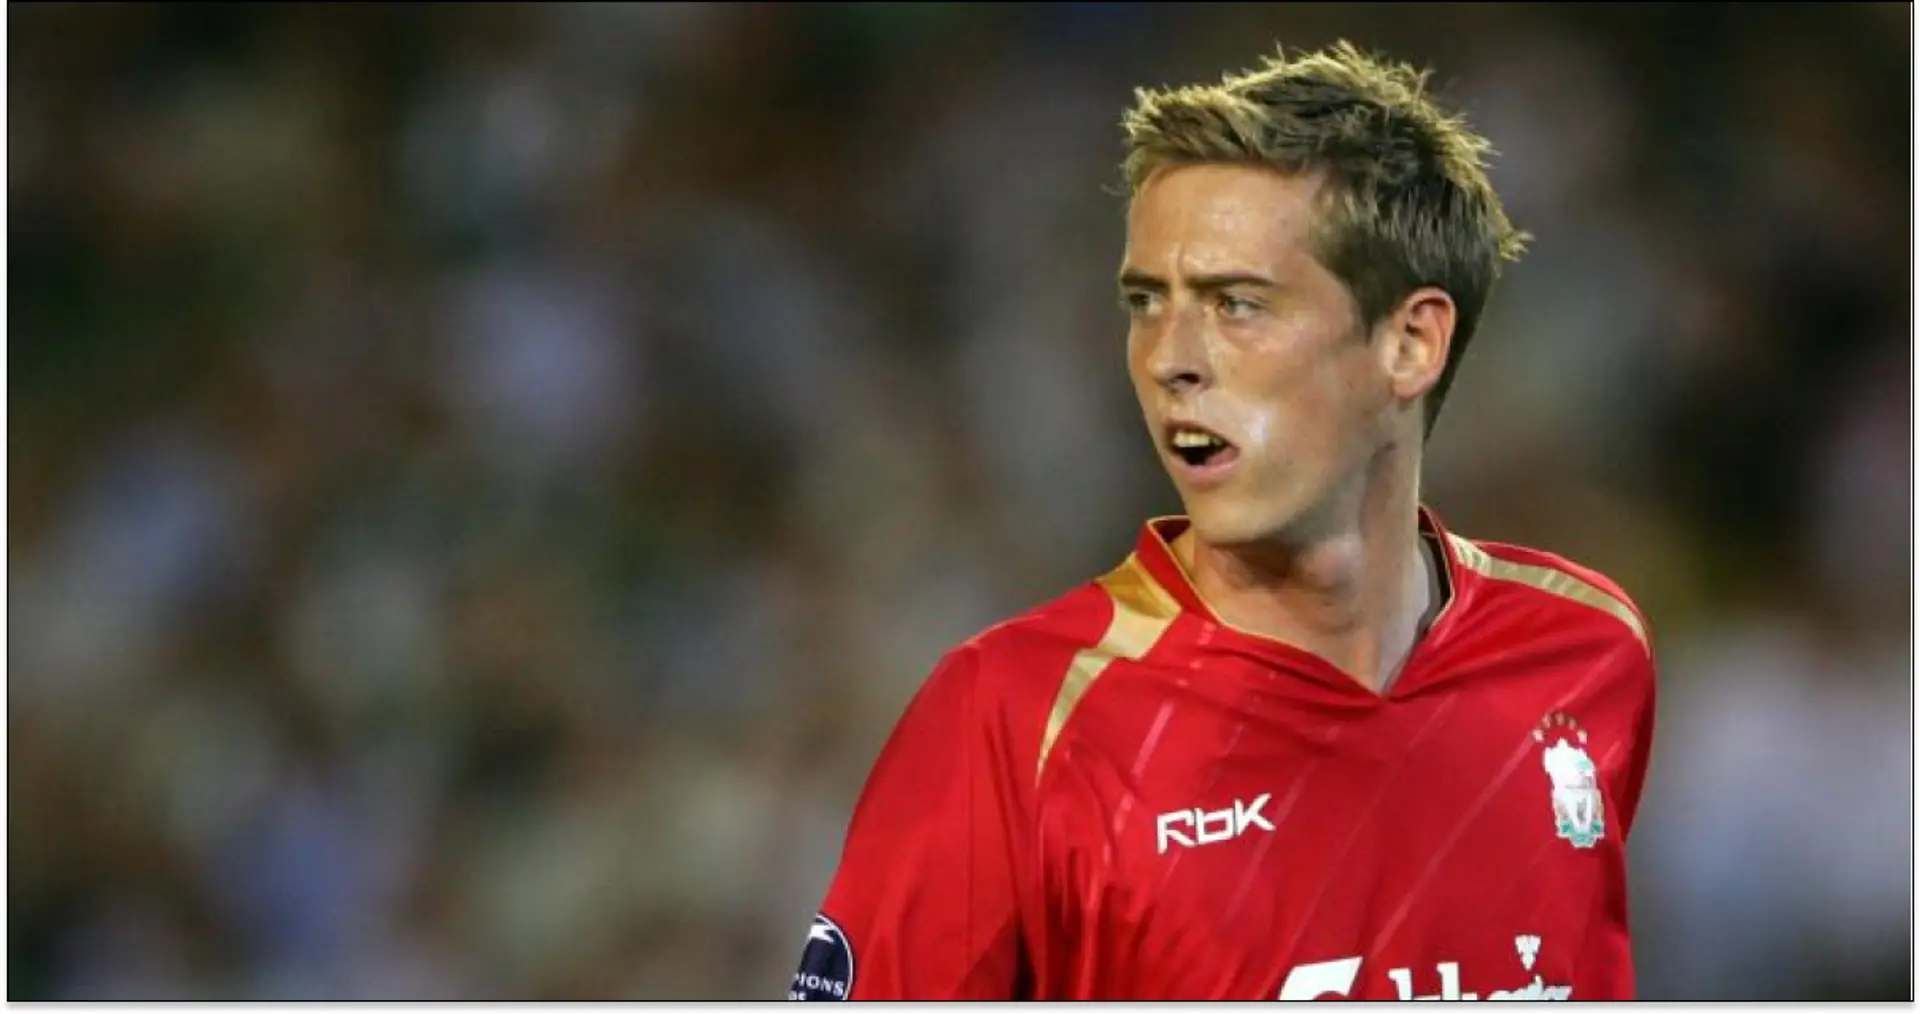 Crouch names first months at Liverpool as 'worst experience in my life', explains why he's 'thankful' to Reds fans